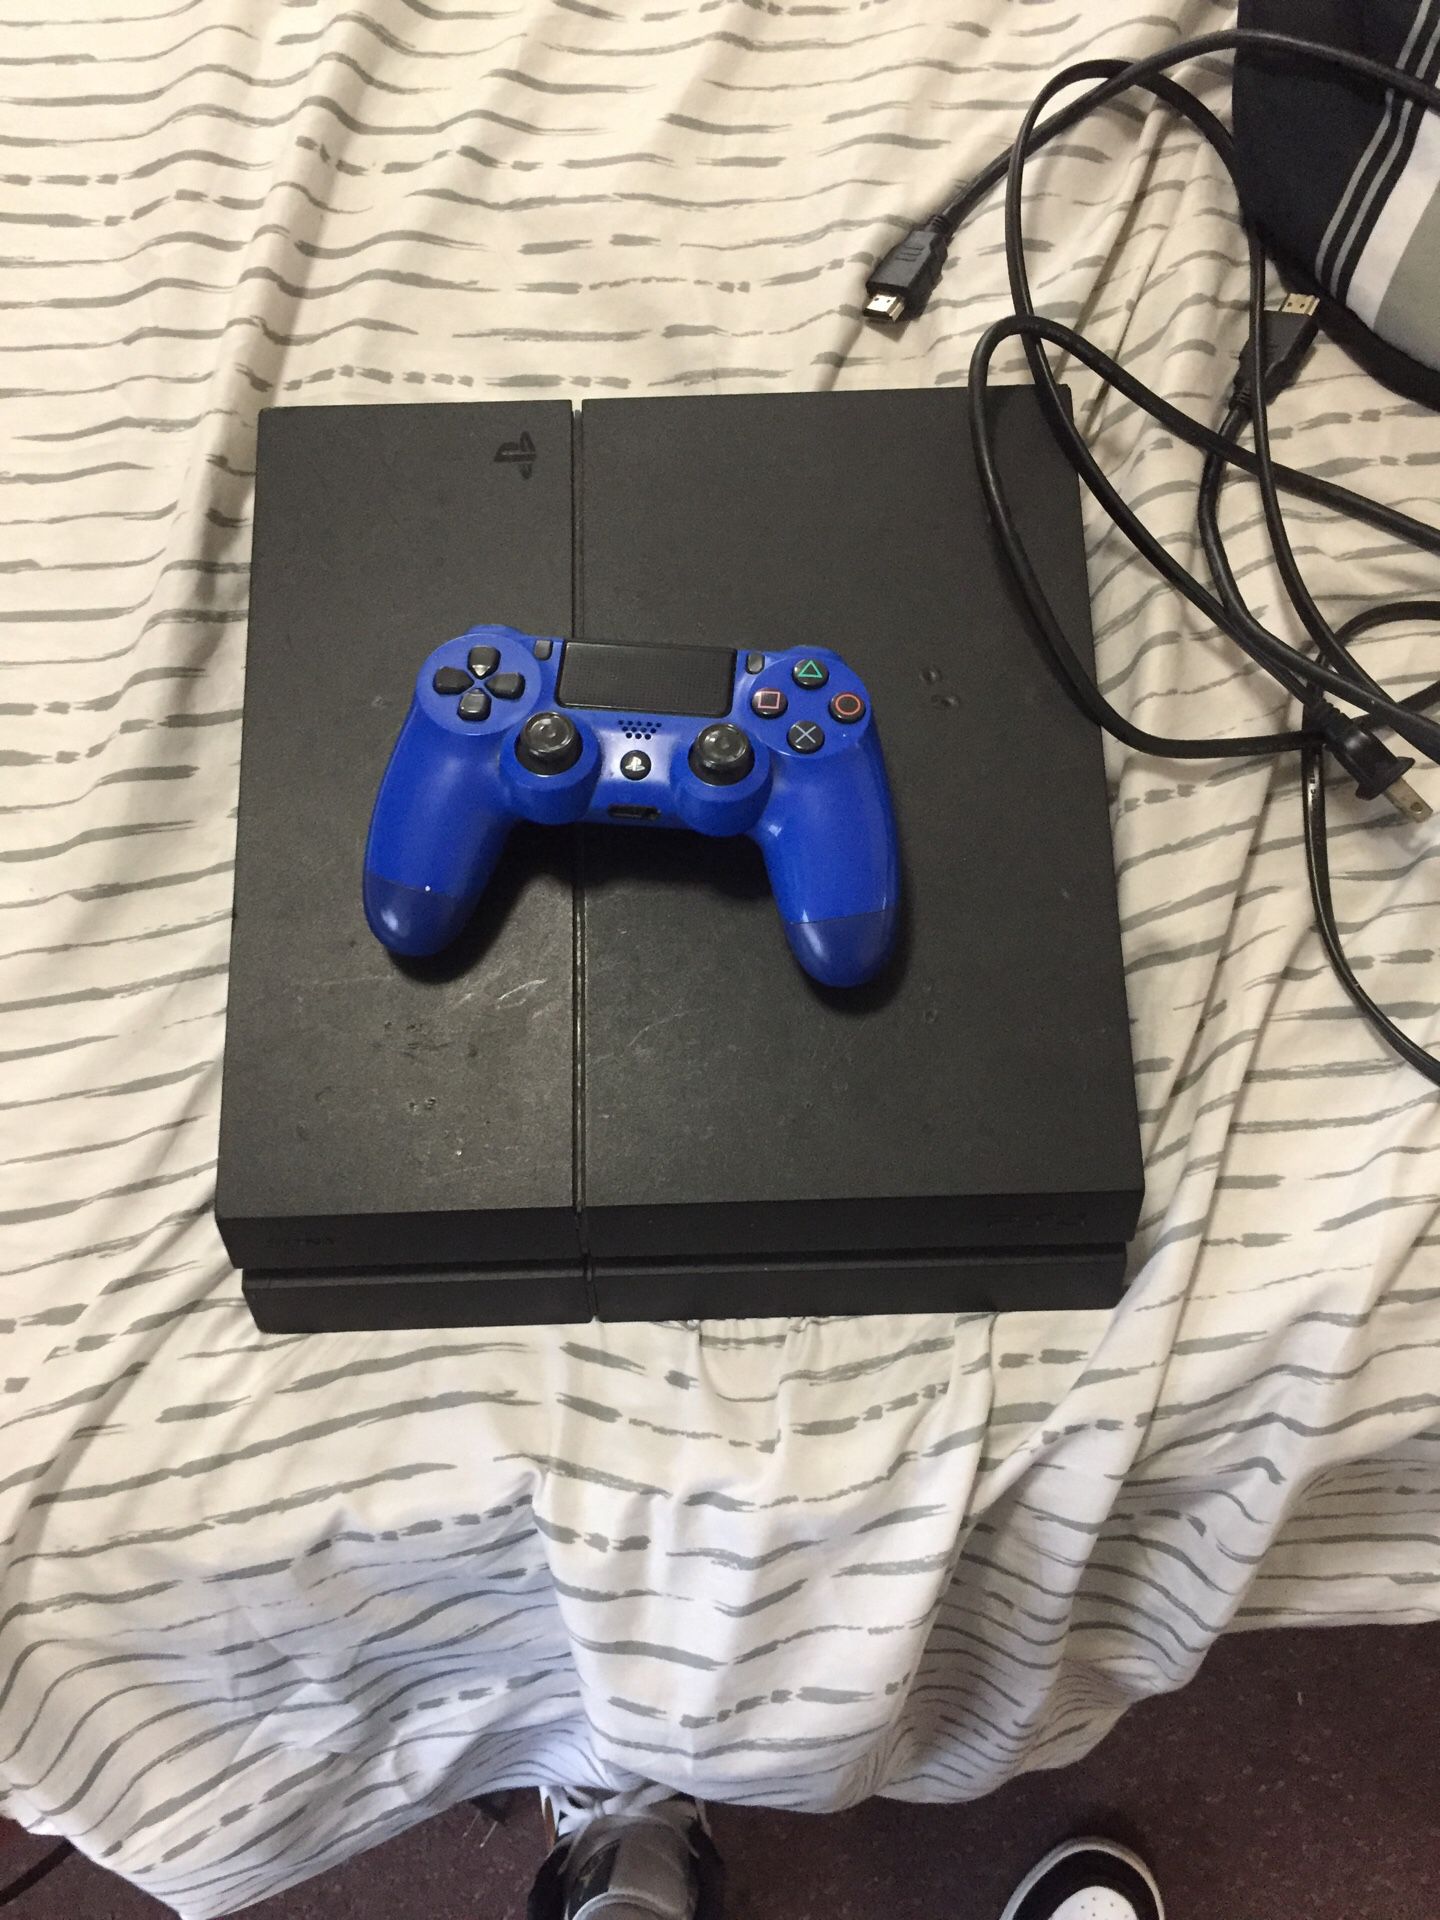 PlayStation 4 (comes with NBA 2k20 on console)